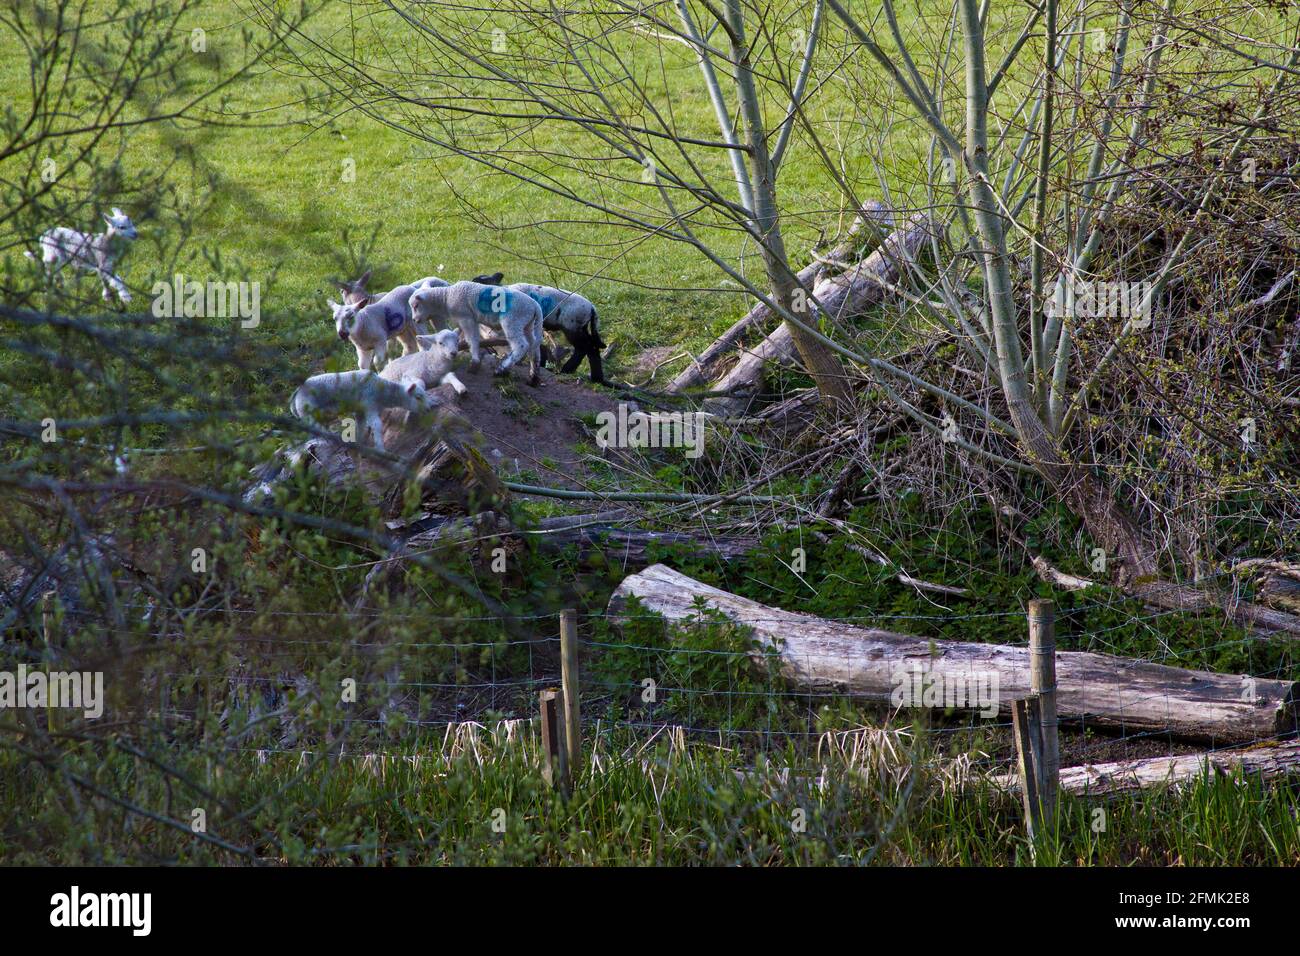 Springtime in England. Lambs playing near a river, climbing on a mound. Stock Photo